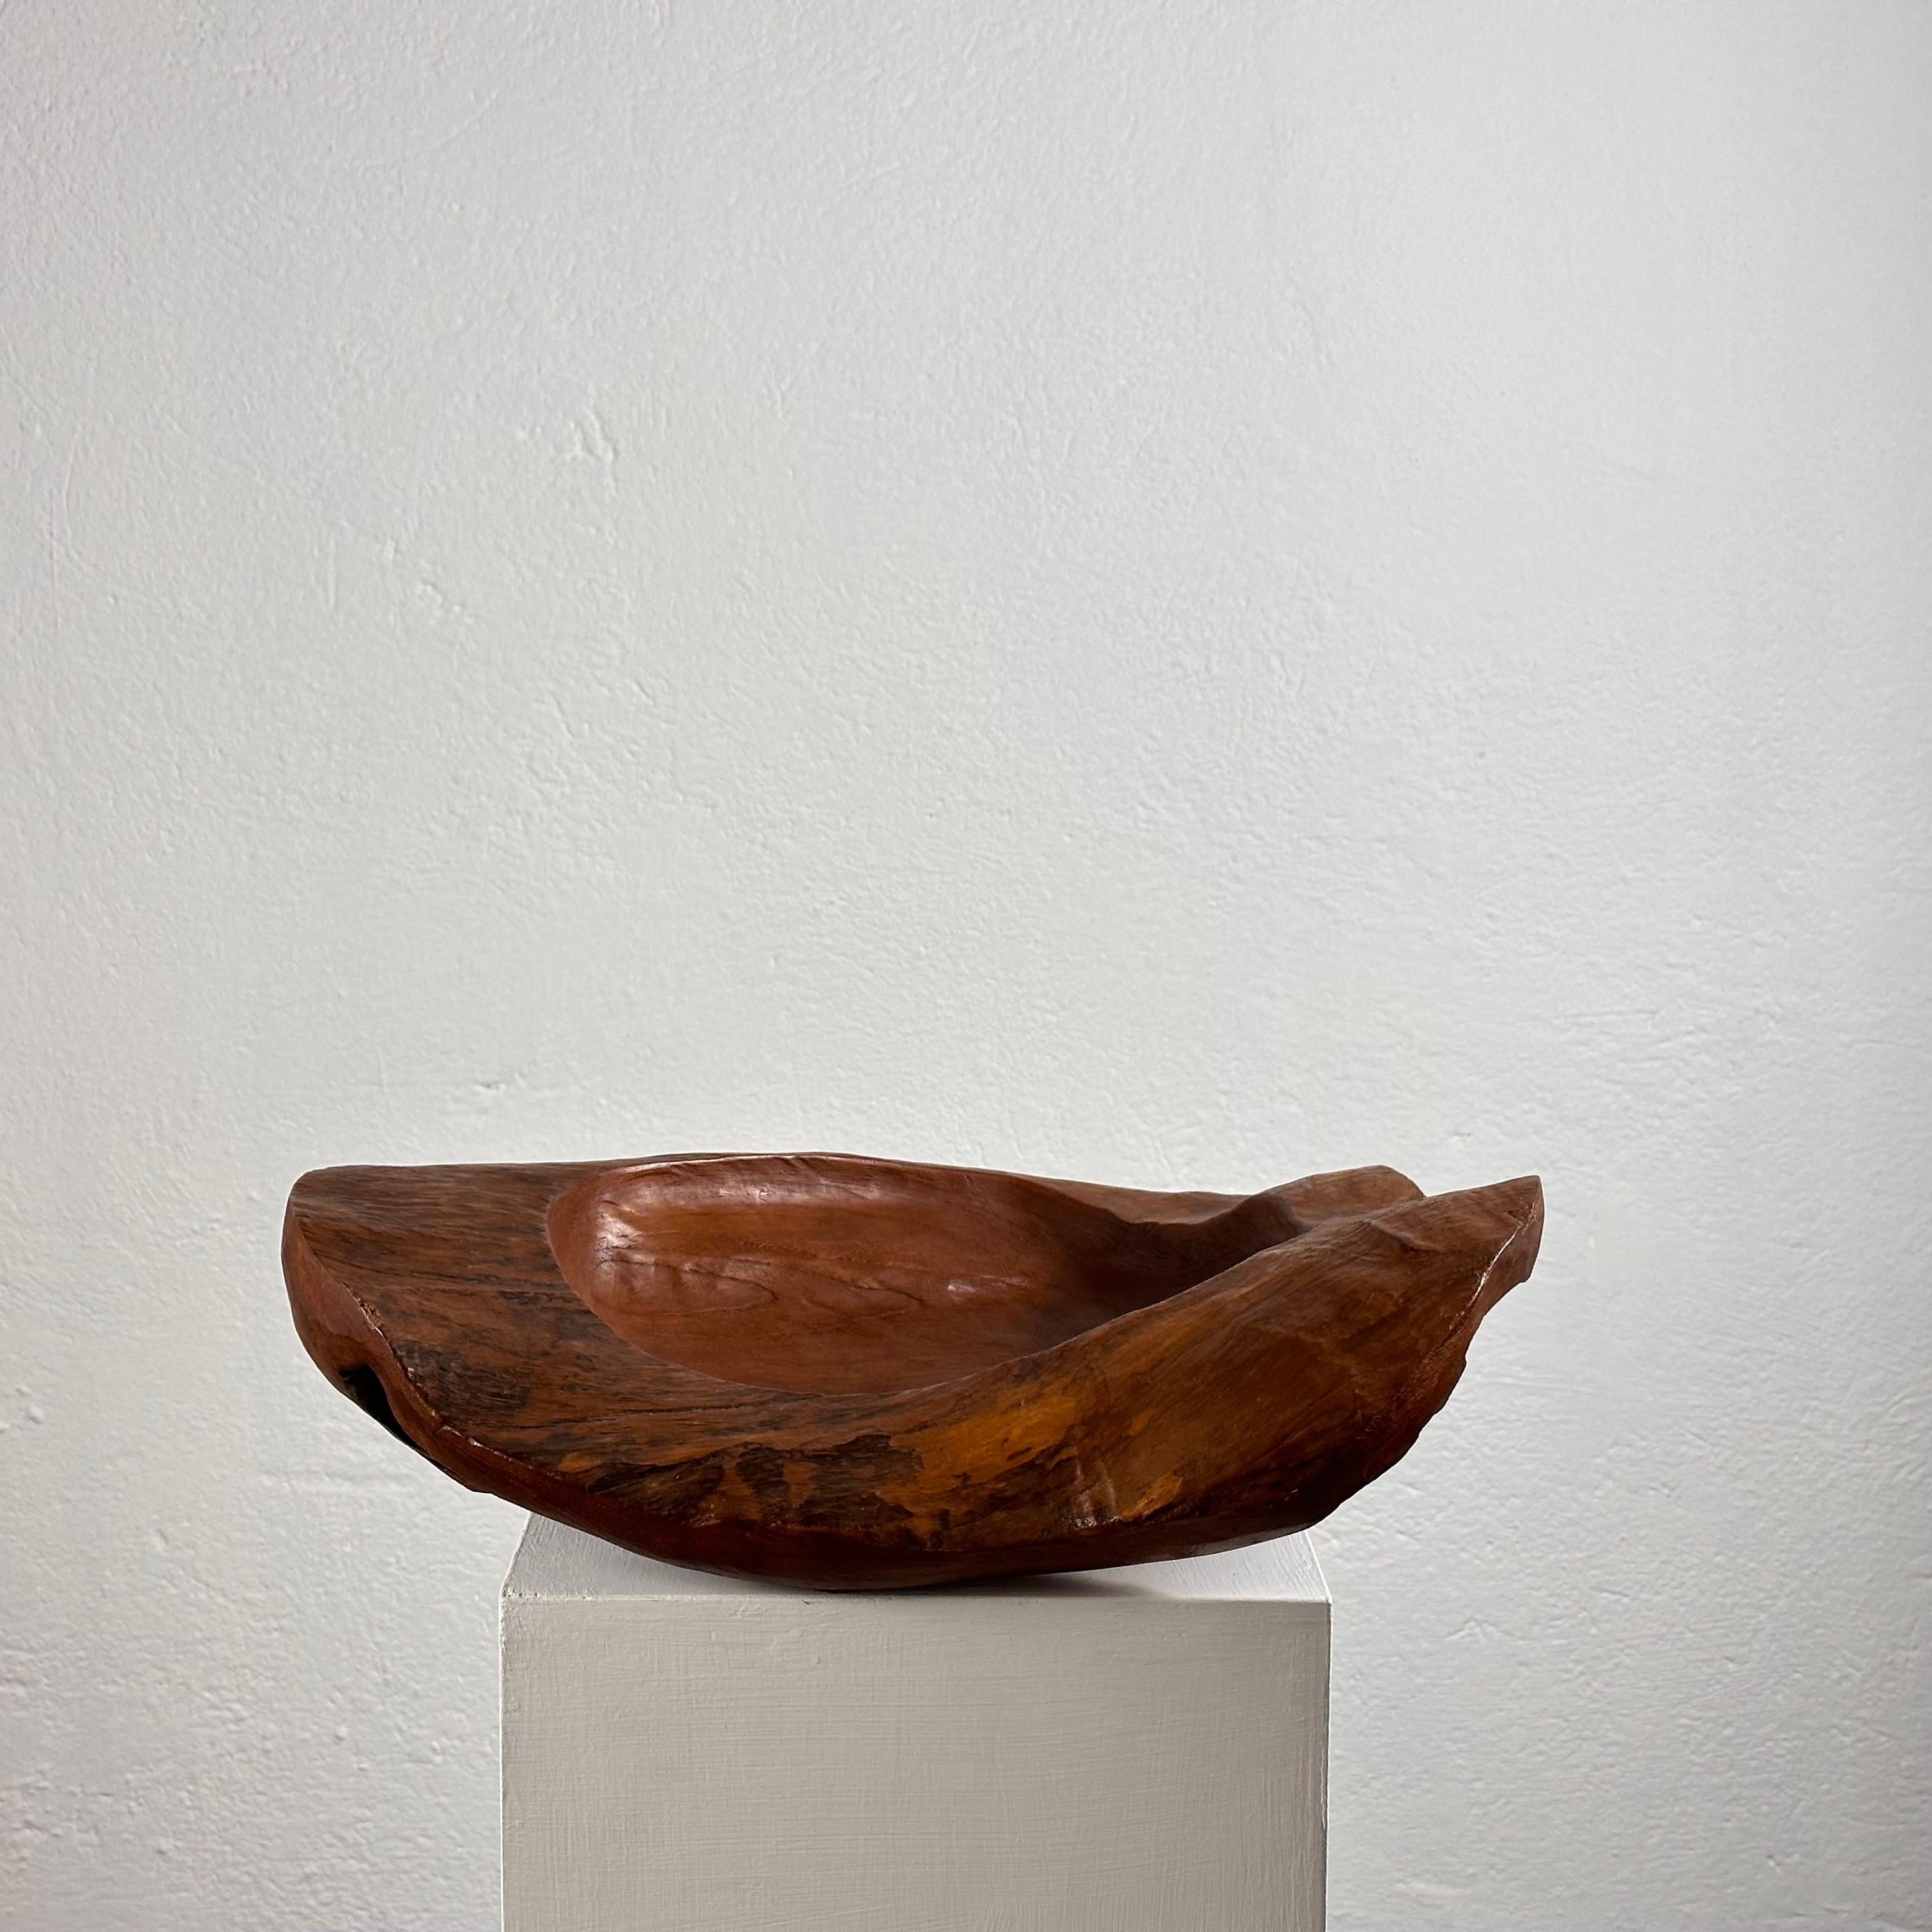 Discover a captivating blend of nature and craftsmanship with this stunning vintage bowl/centerpiece, crafted from exquisite briar wood in the 1960s. This one-of-a-kind piece boasts a distinctive live edge, intricately hand-carved to accentuate the